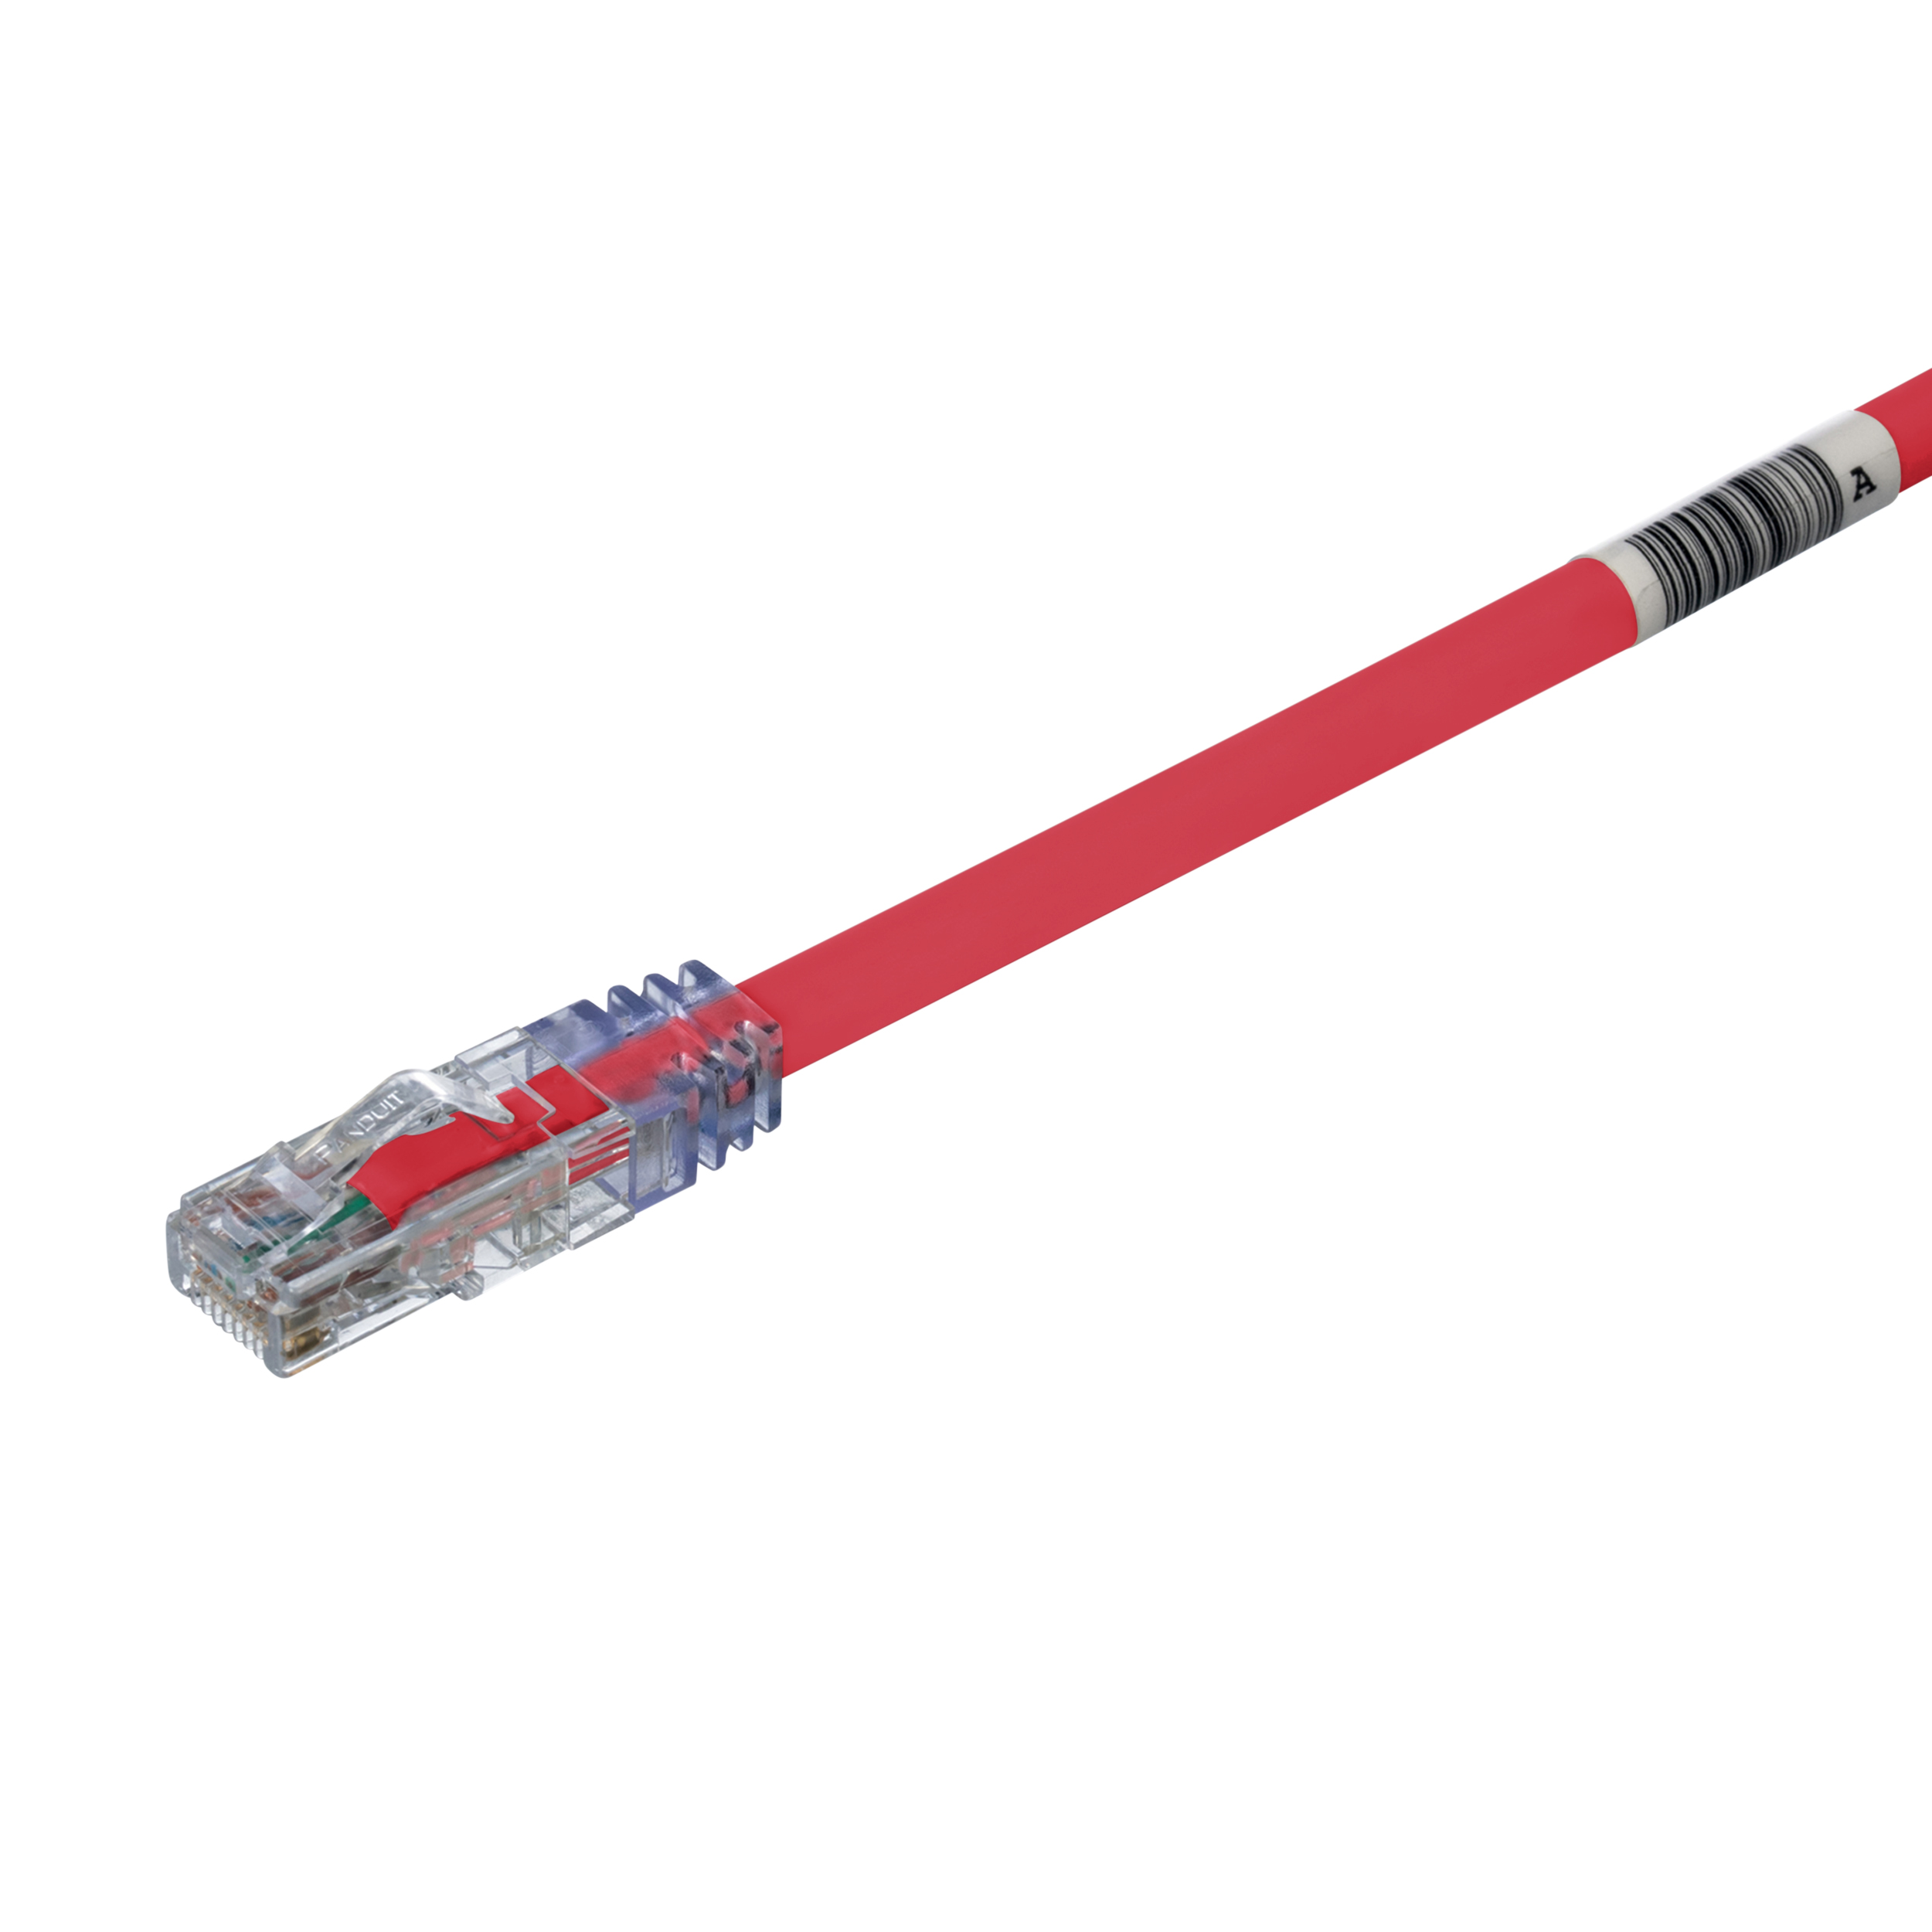 Cat 6A 24 AWG UTP Copper Patch Cord, 3 m, Red